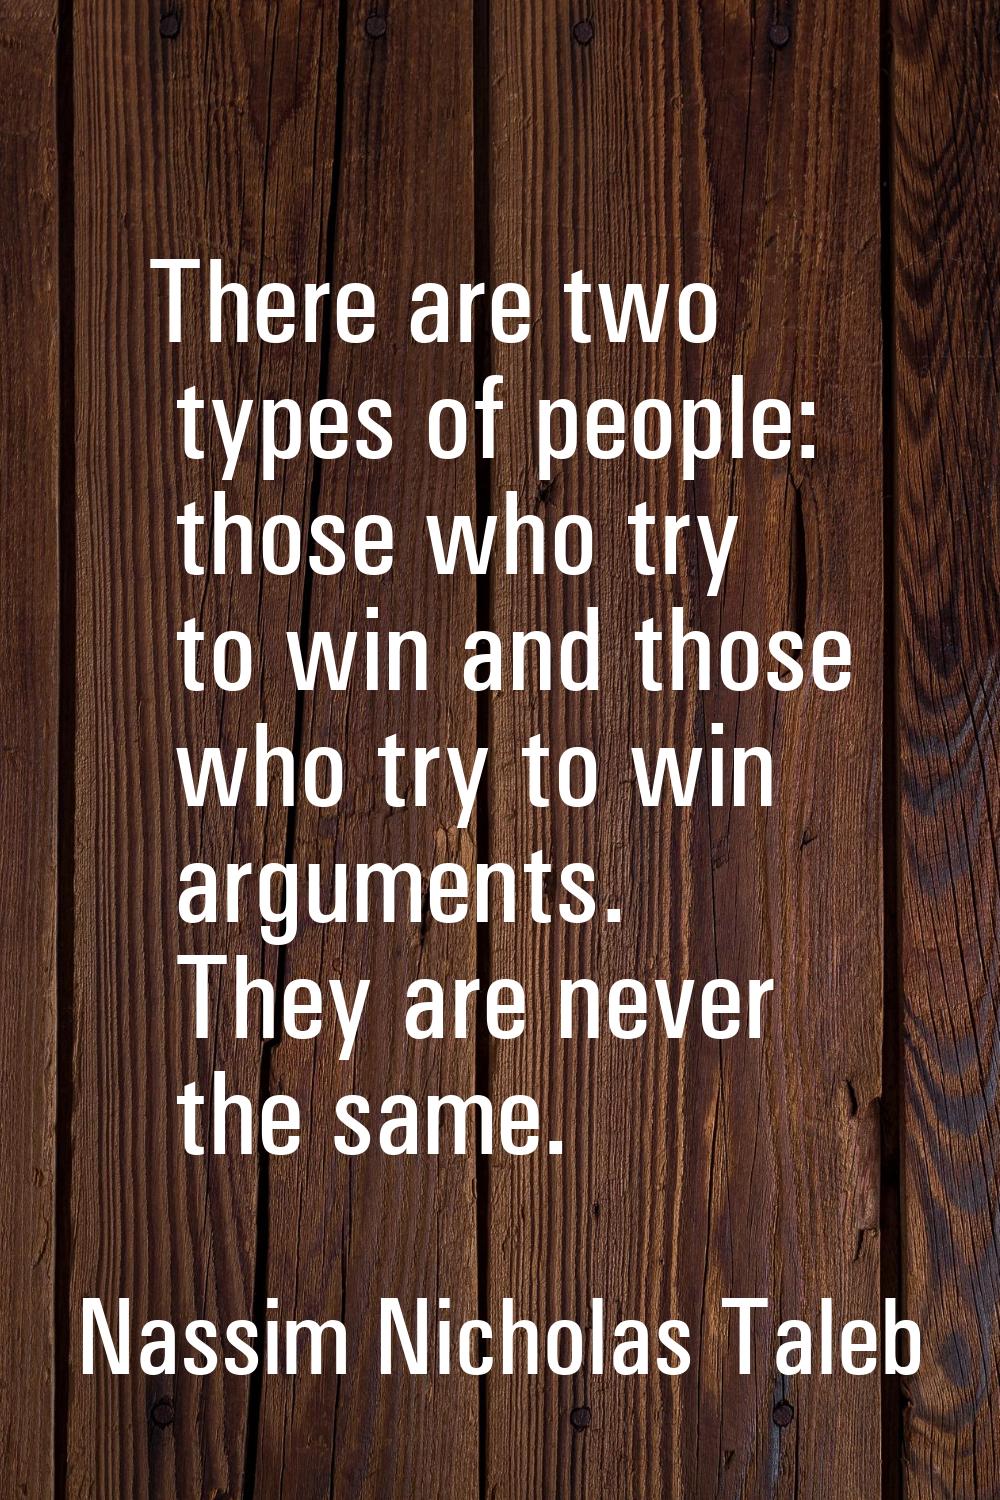 There are two types of people: those who try to win and those who try to win arguments. They are ne